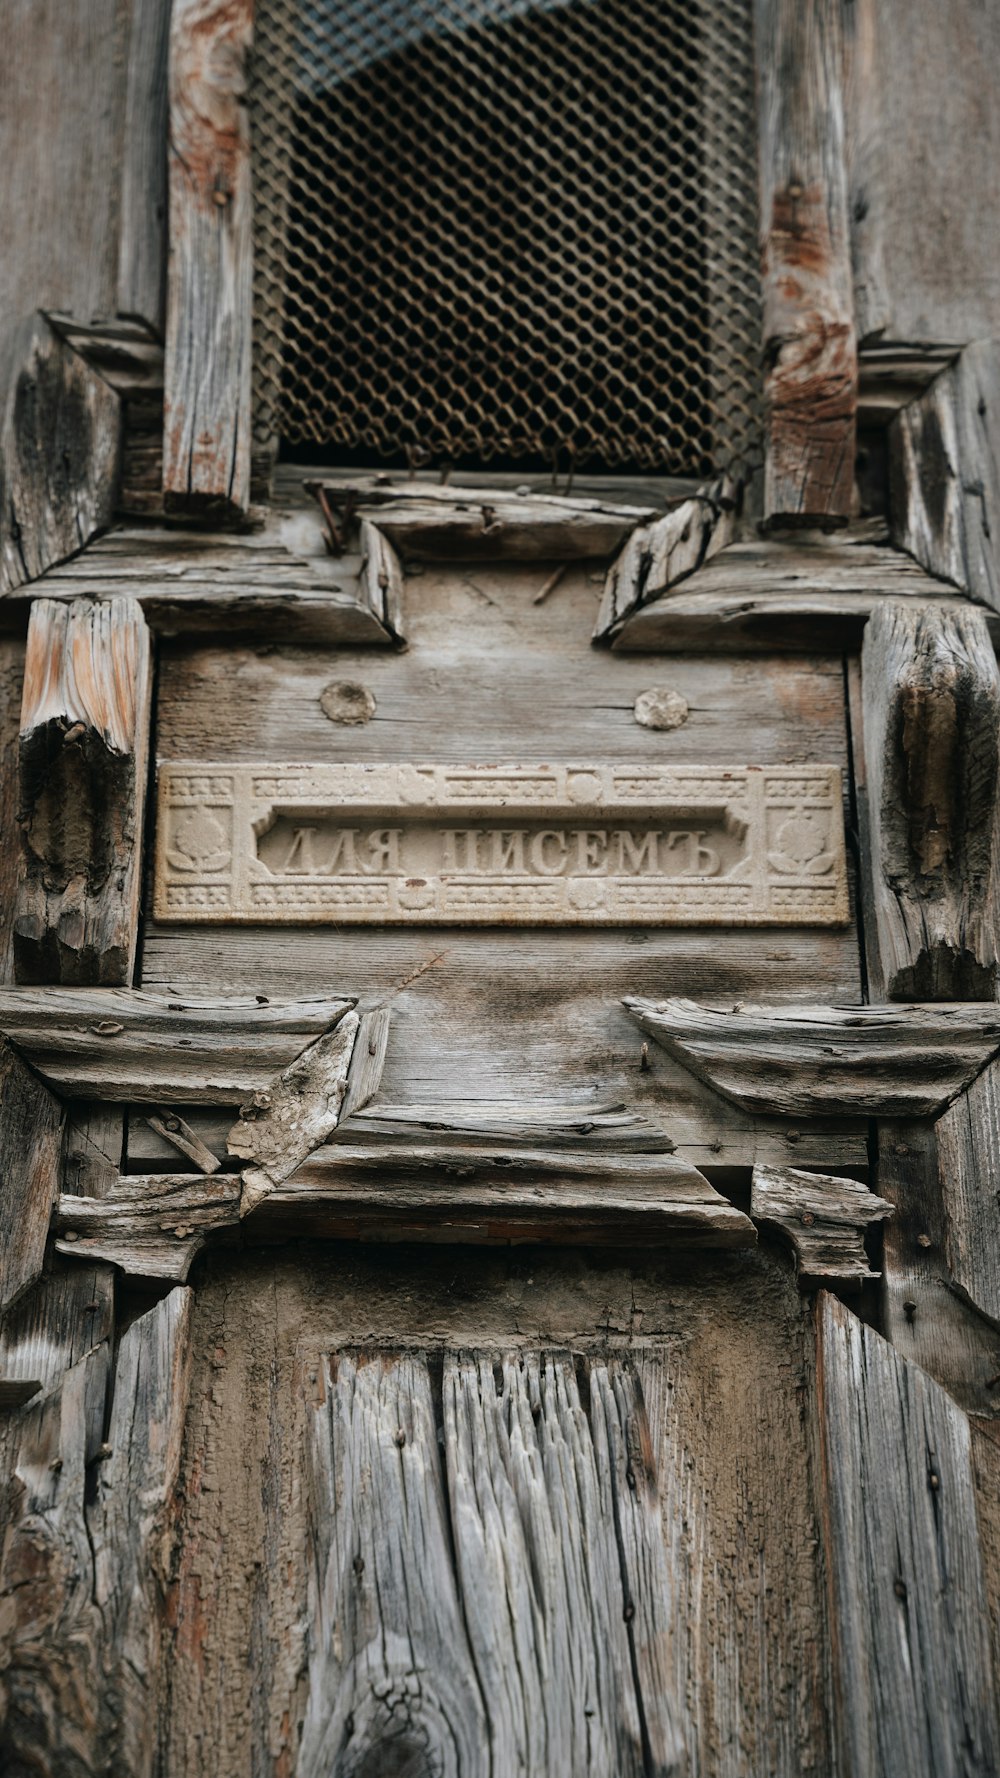 a close up of a wooden door with a sign on it